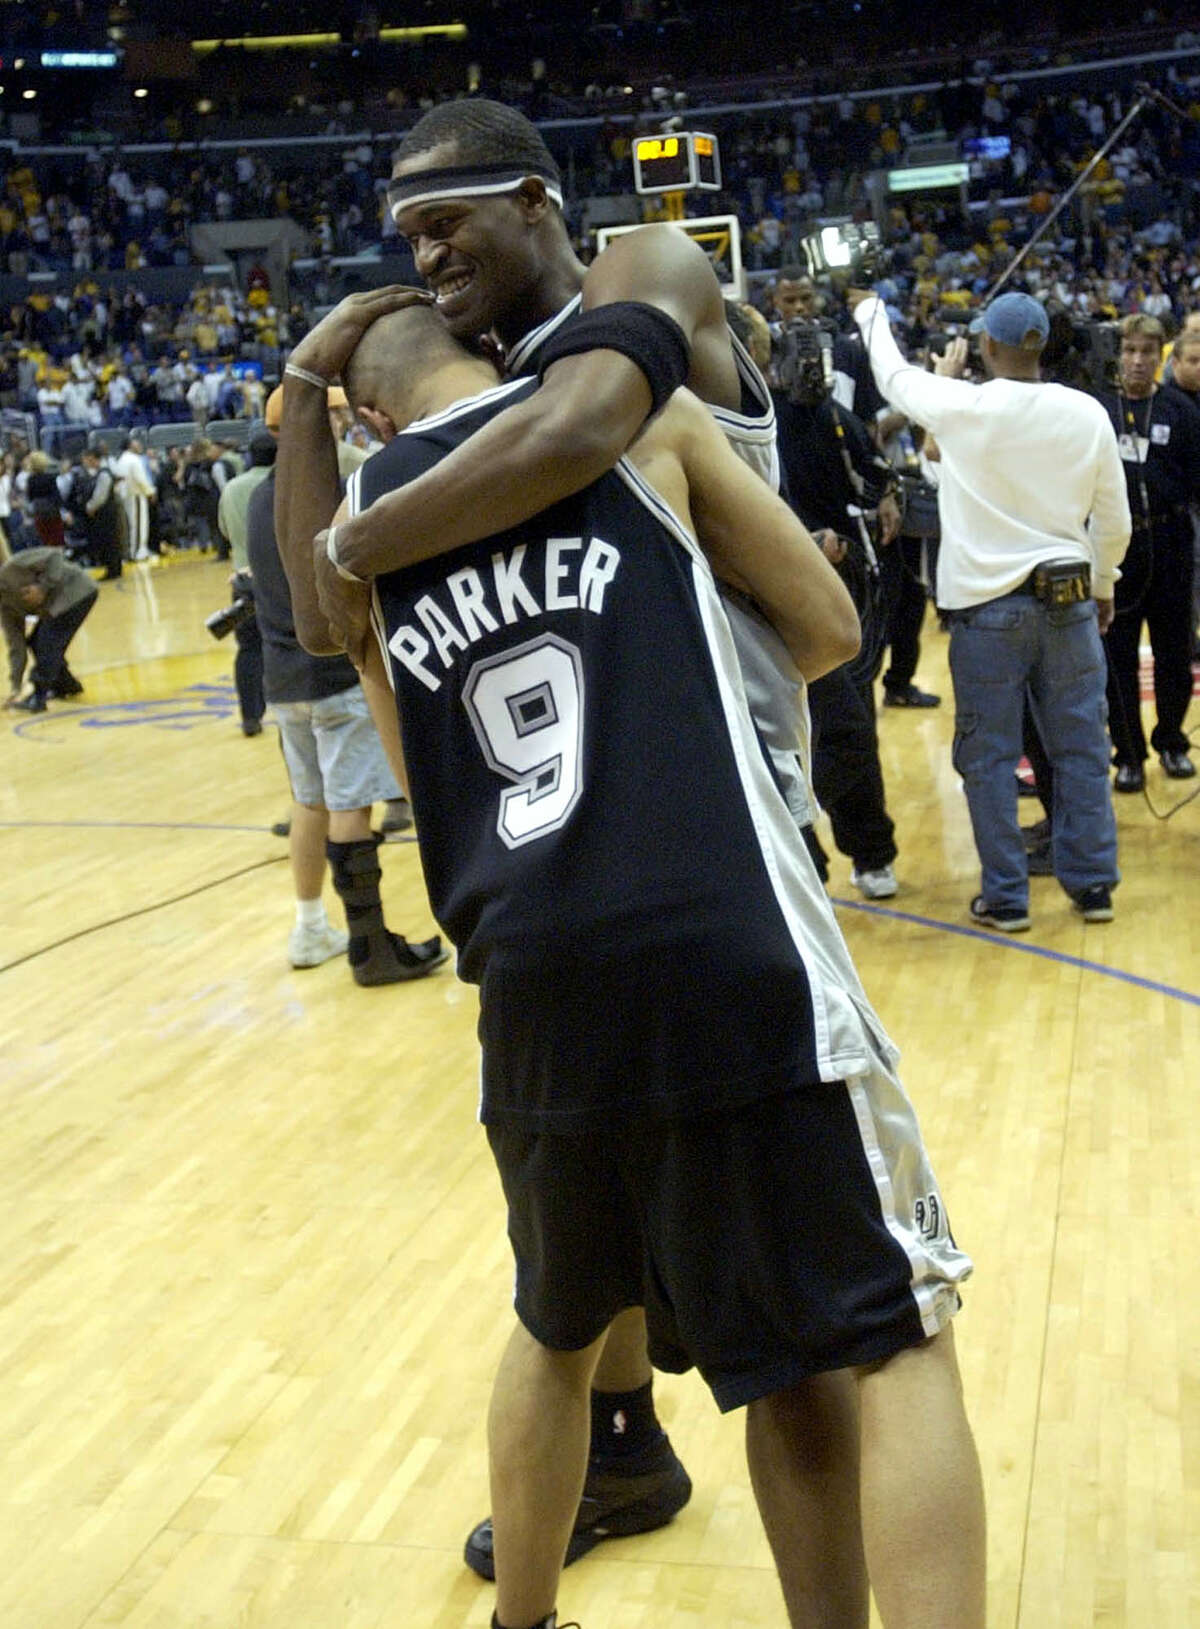 The Spurs’ Tony Parker and Stephen Jackson celebrate May 15, 2003 at the Staples Center in Los Angeles after winning Game 6 of the Western Conference semifinals game against the Lakers 110-82.